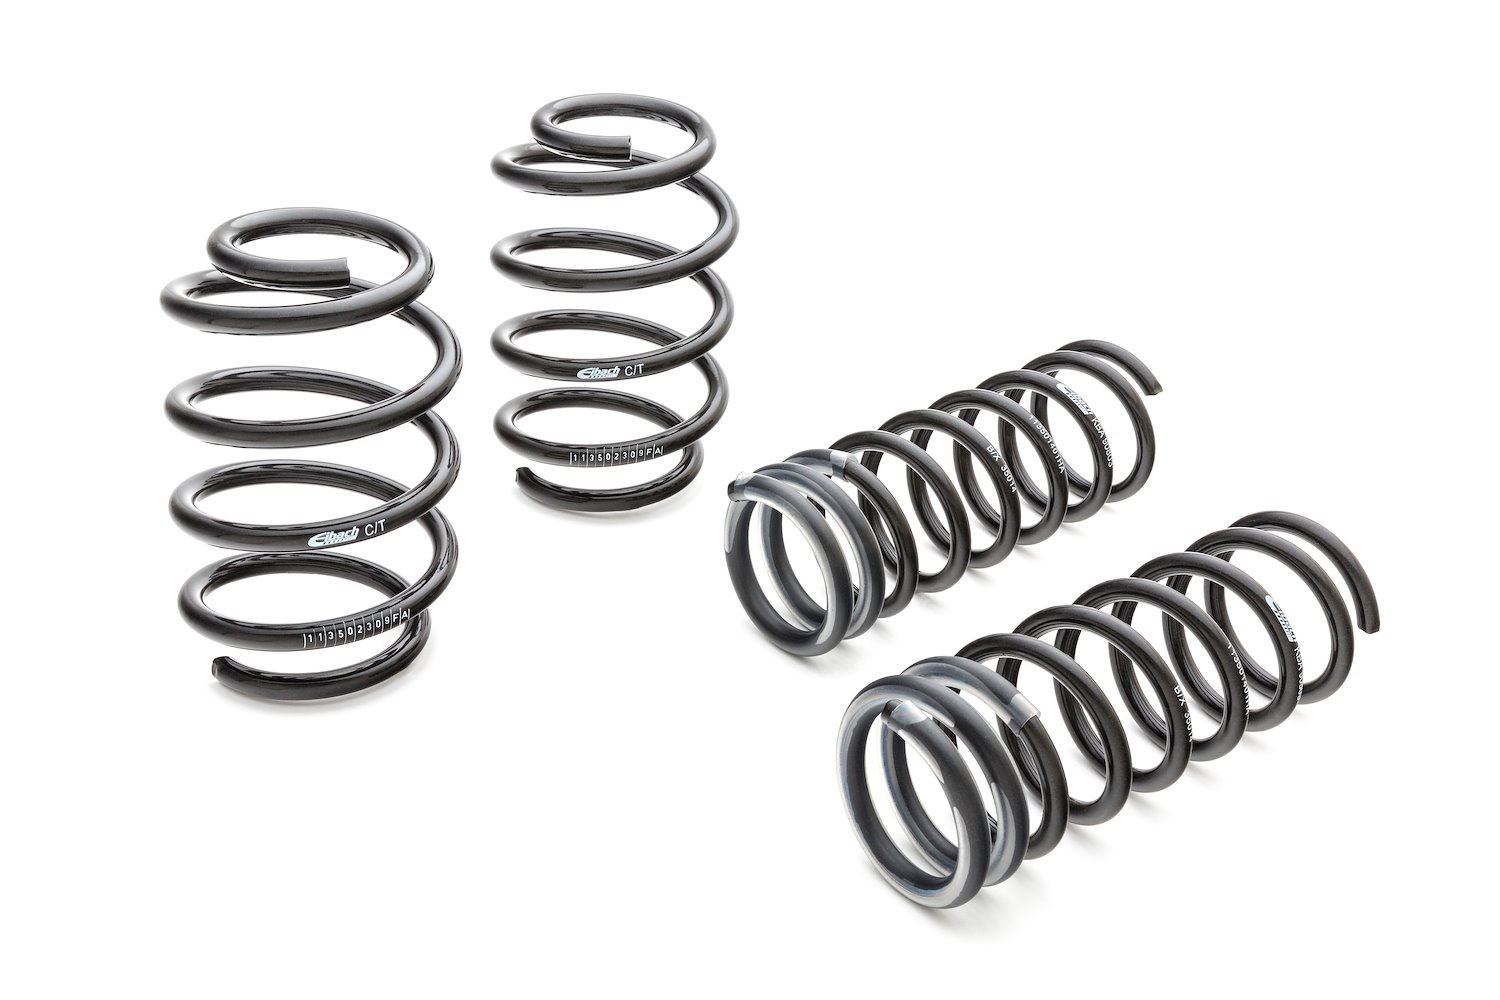 4018.140 Pro-Kit Lowering Springs 1996-2000 Civic - 1.500 in. Front/1.300 in. Rear Drop